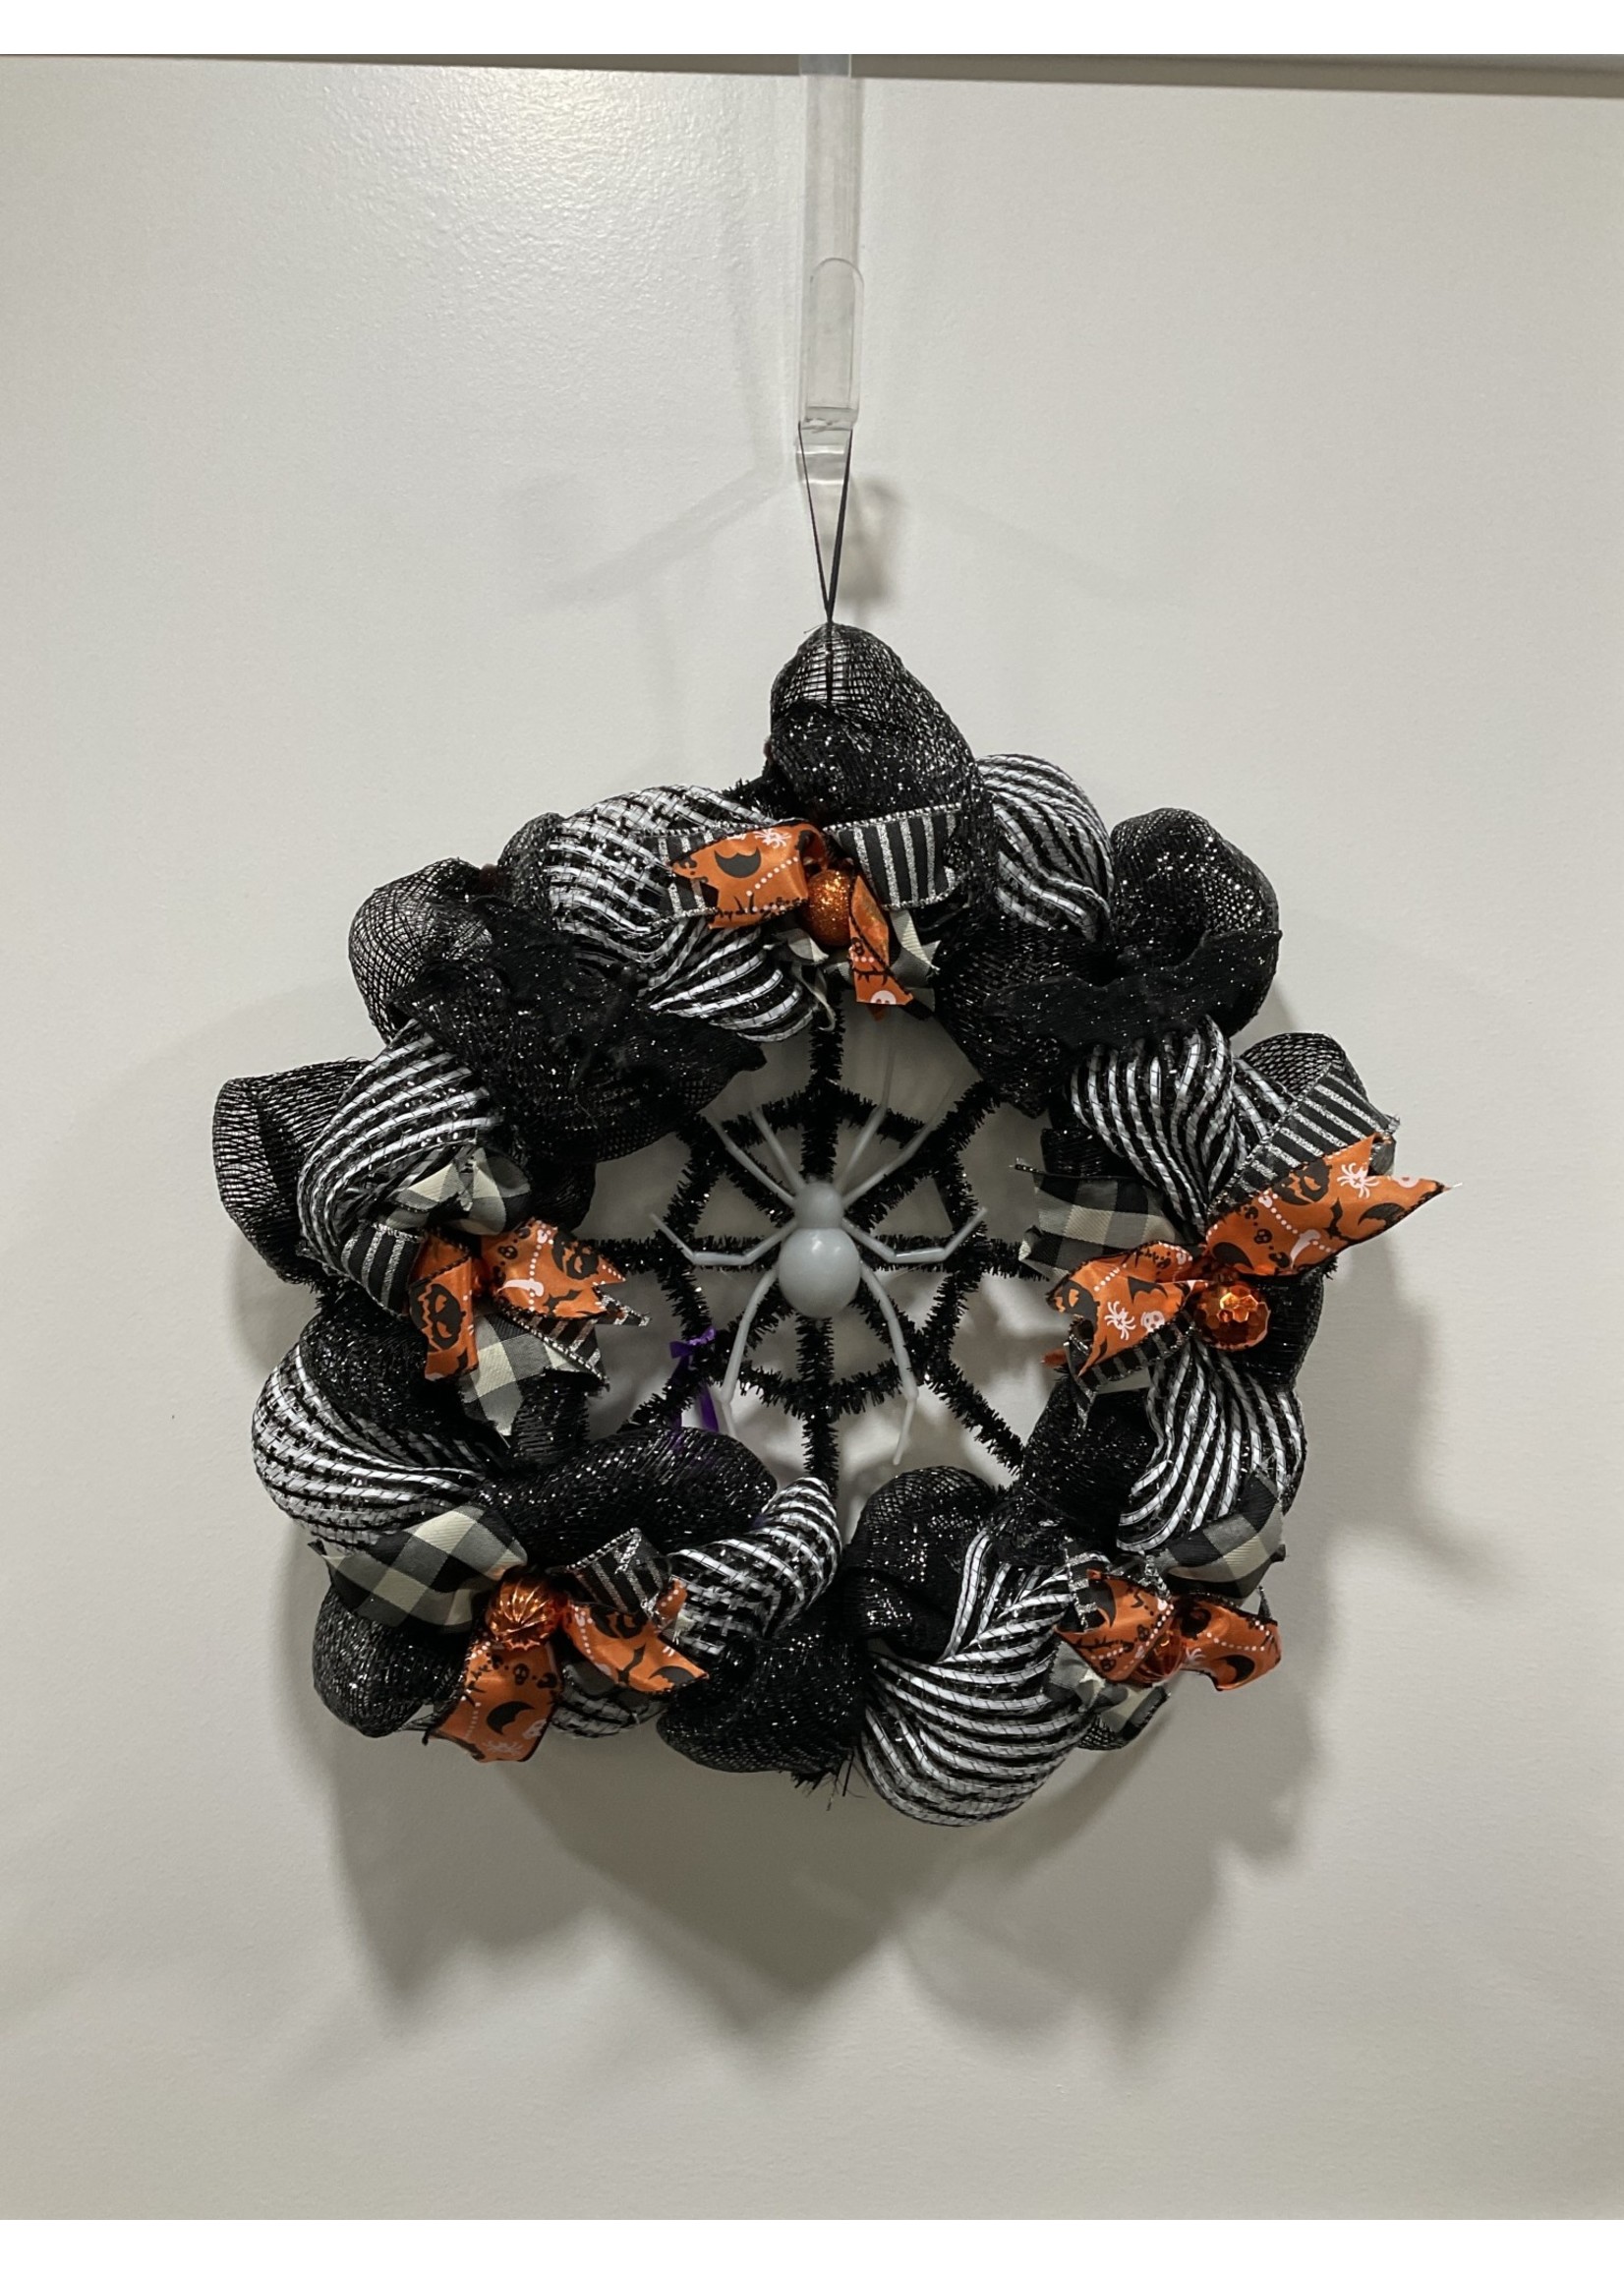 My New Favorite Thing 1322 Wreath Mesh Spider 18 in-Black and White Striped w/Orange Spooky Ribbon